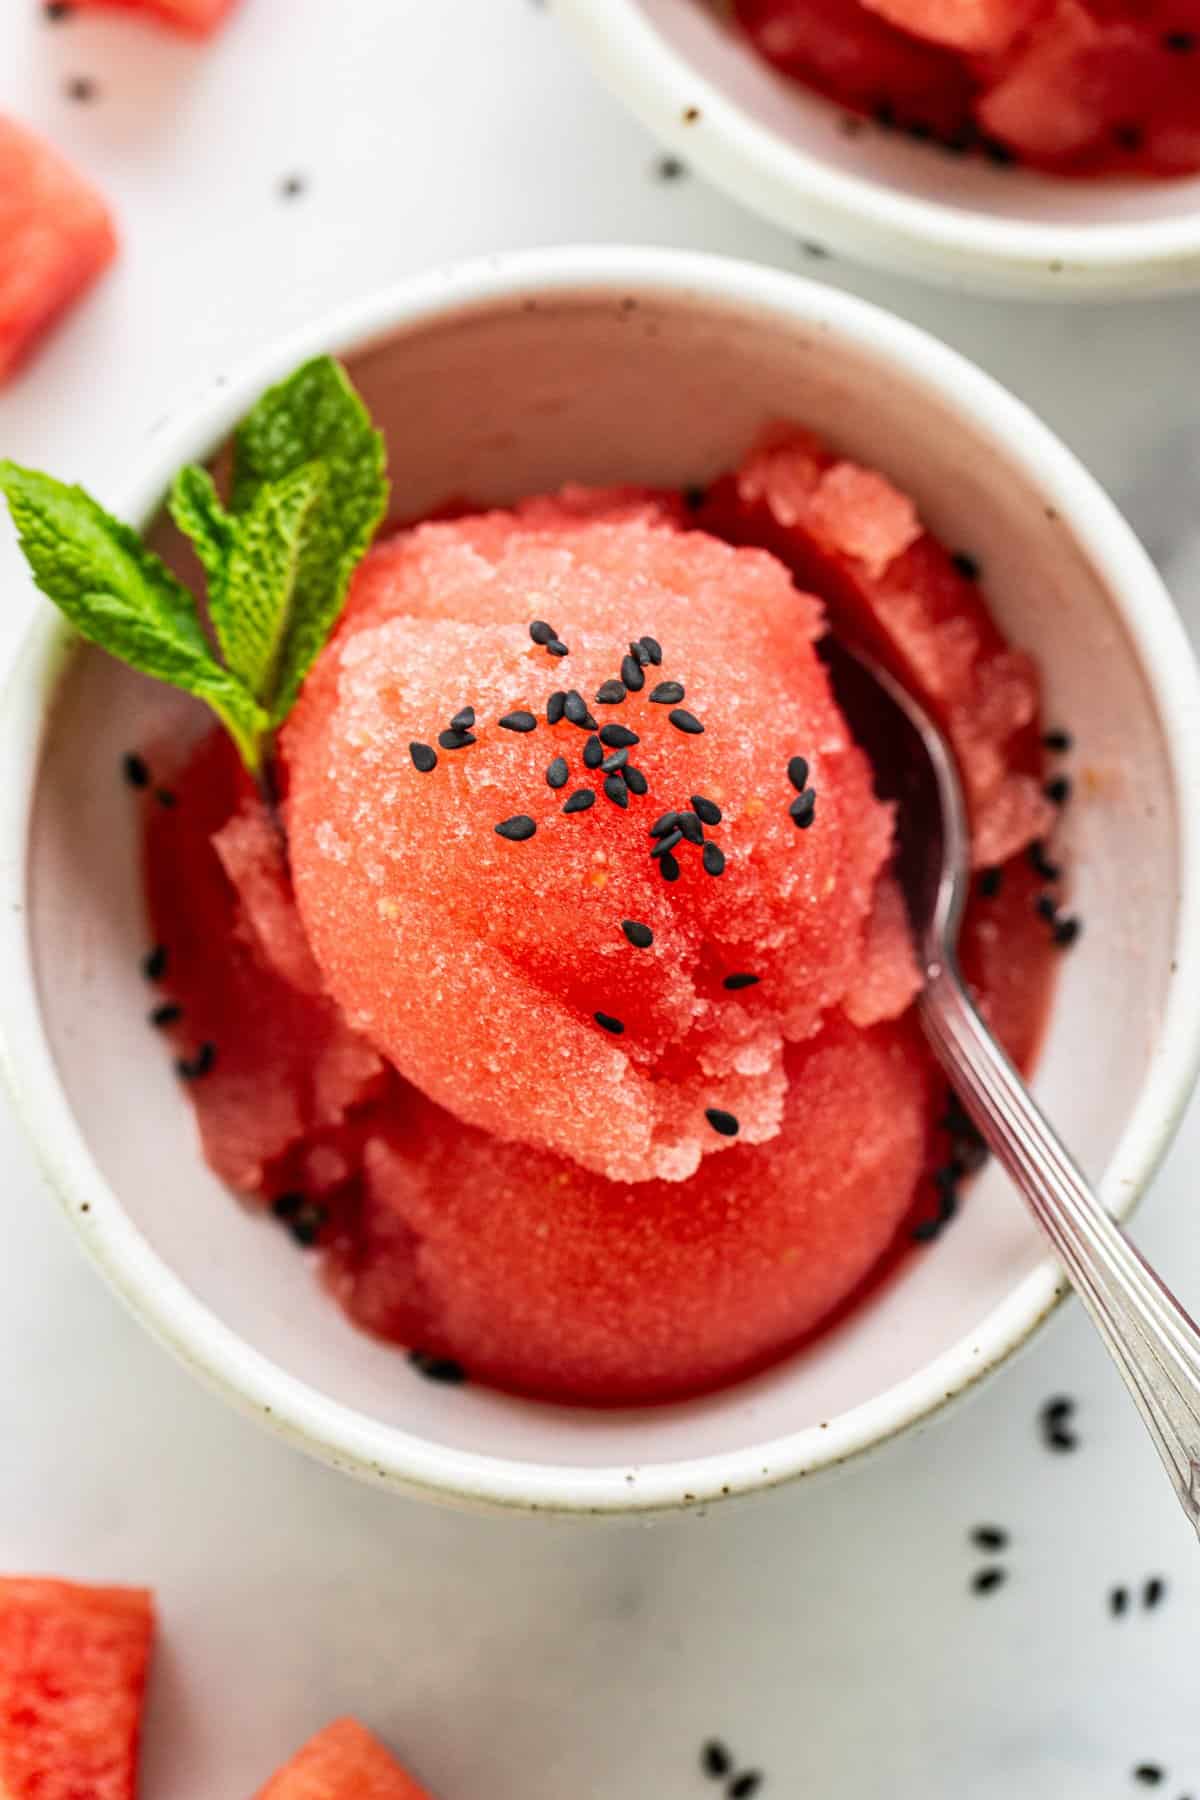 A bowl of watermelon sorbet garnished with mint leaves and black sesame seeds, accompanied by a spoon, on a light surface.